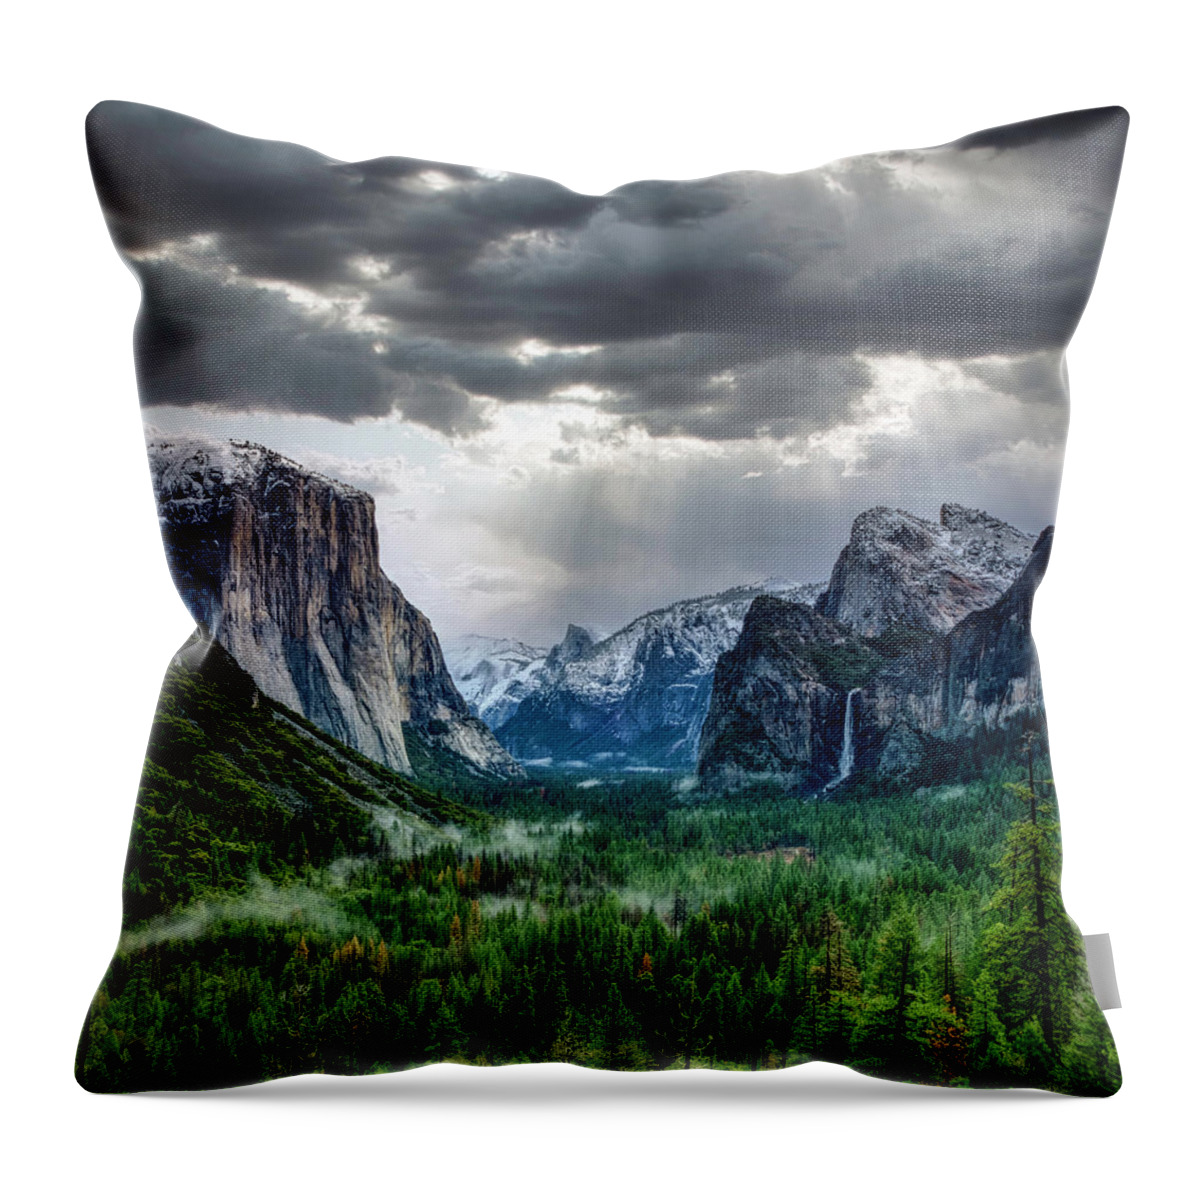 Landscape Throw Pillow featuring the photograph Yosemite Tunnel View by Romeo Victor